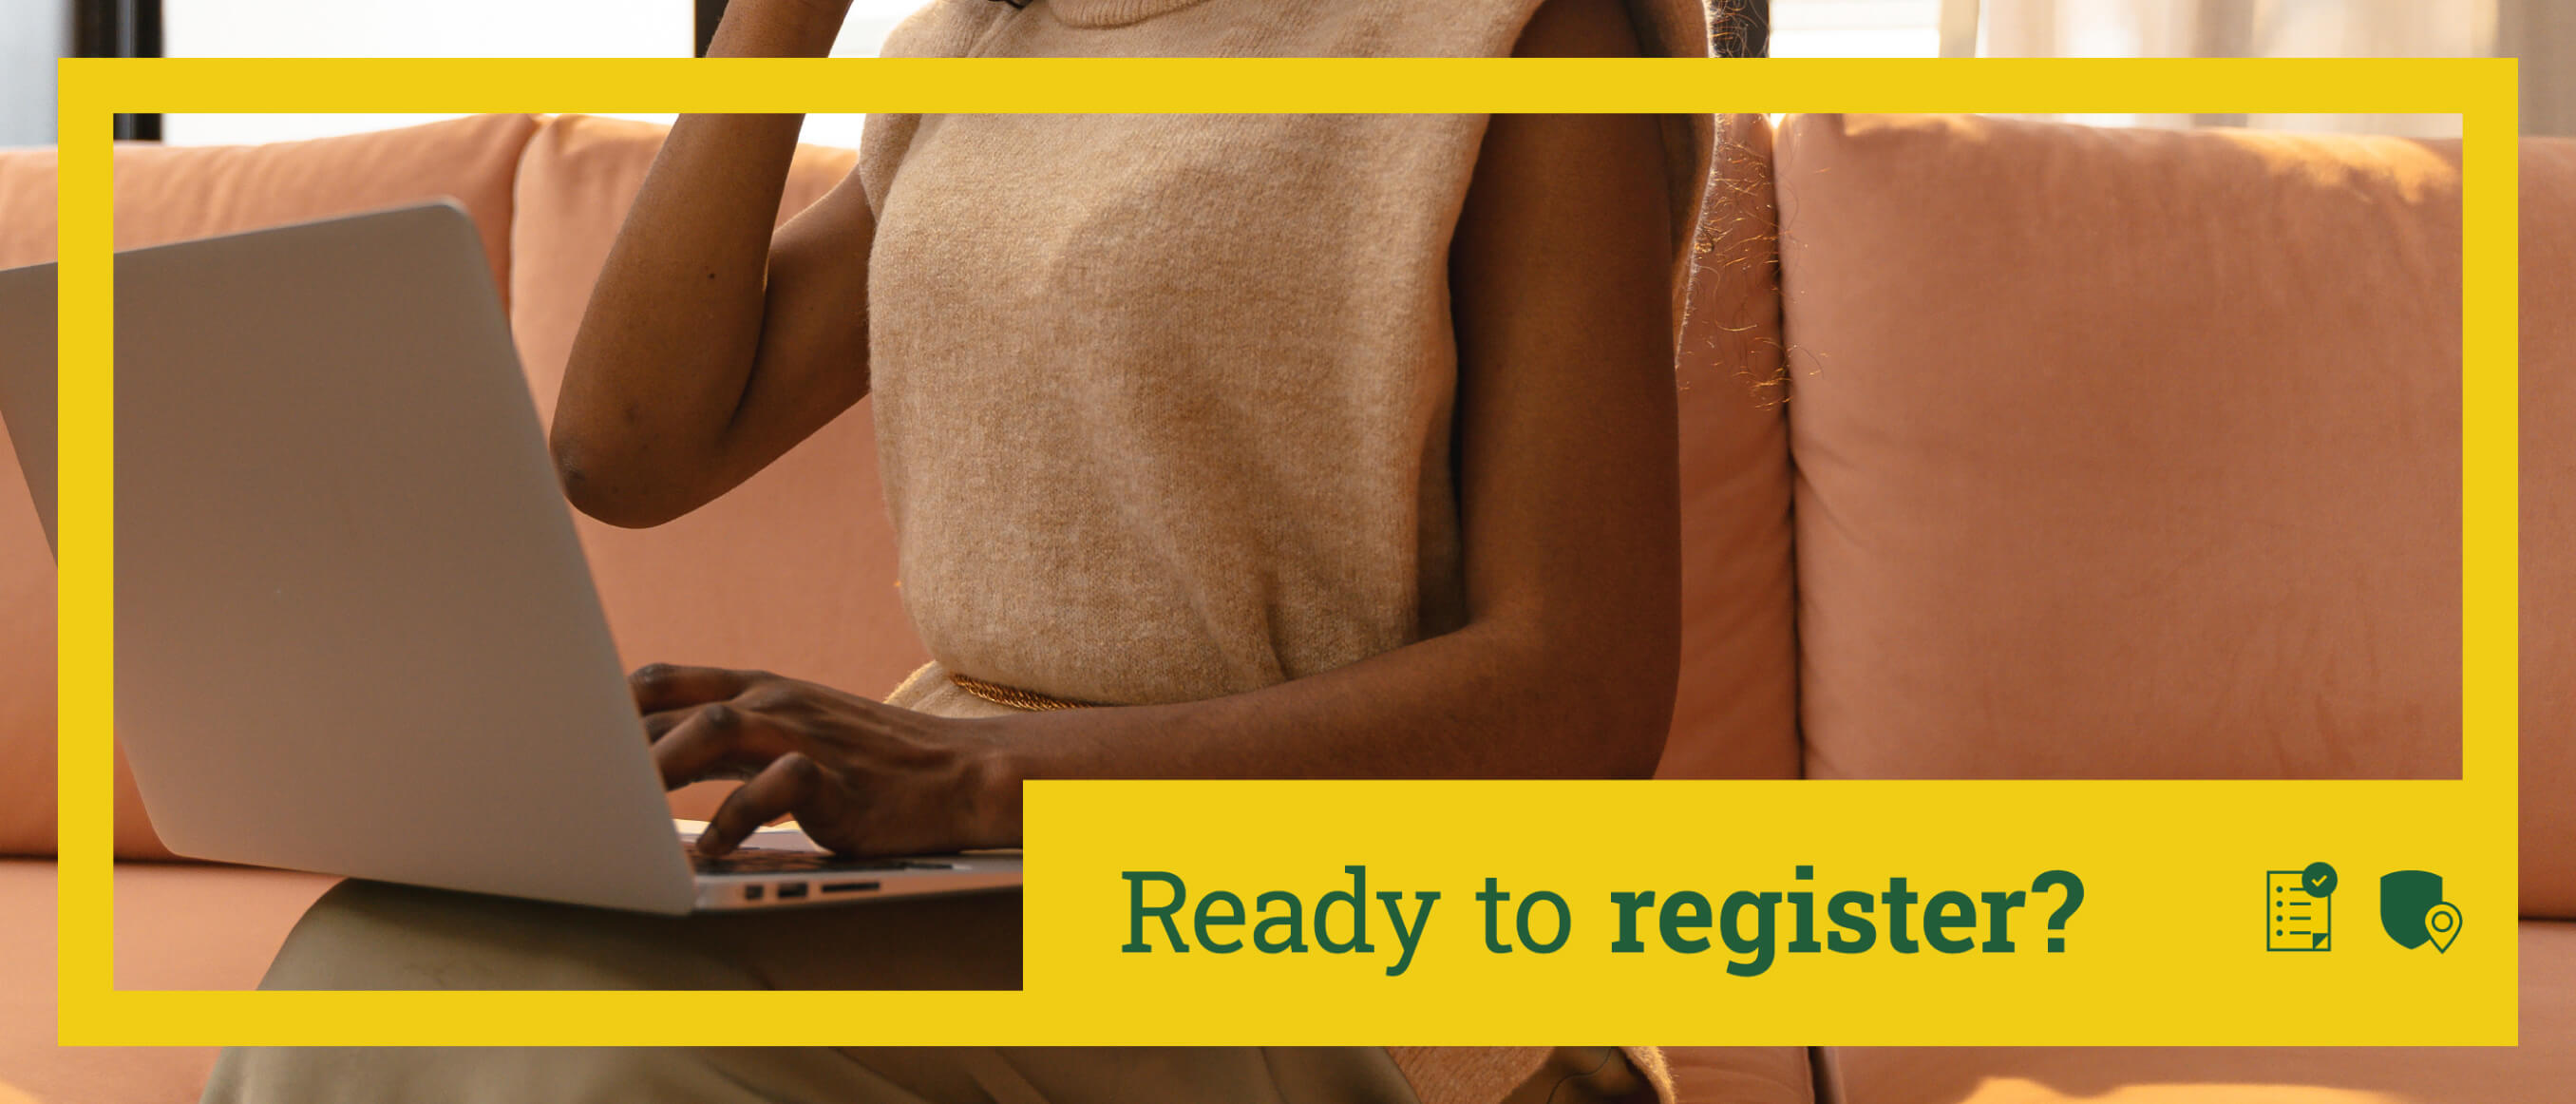 Ready to register?